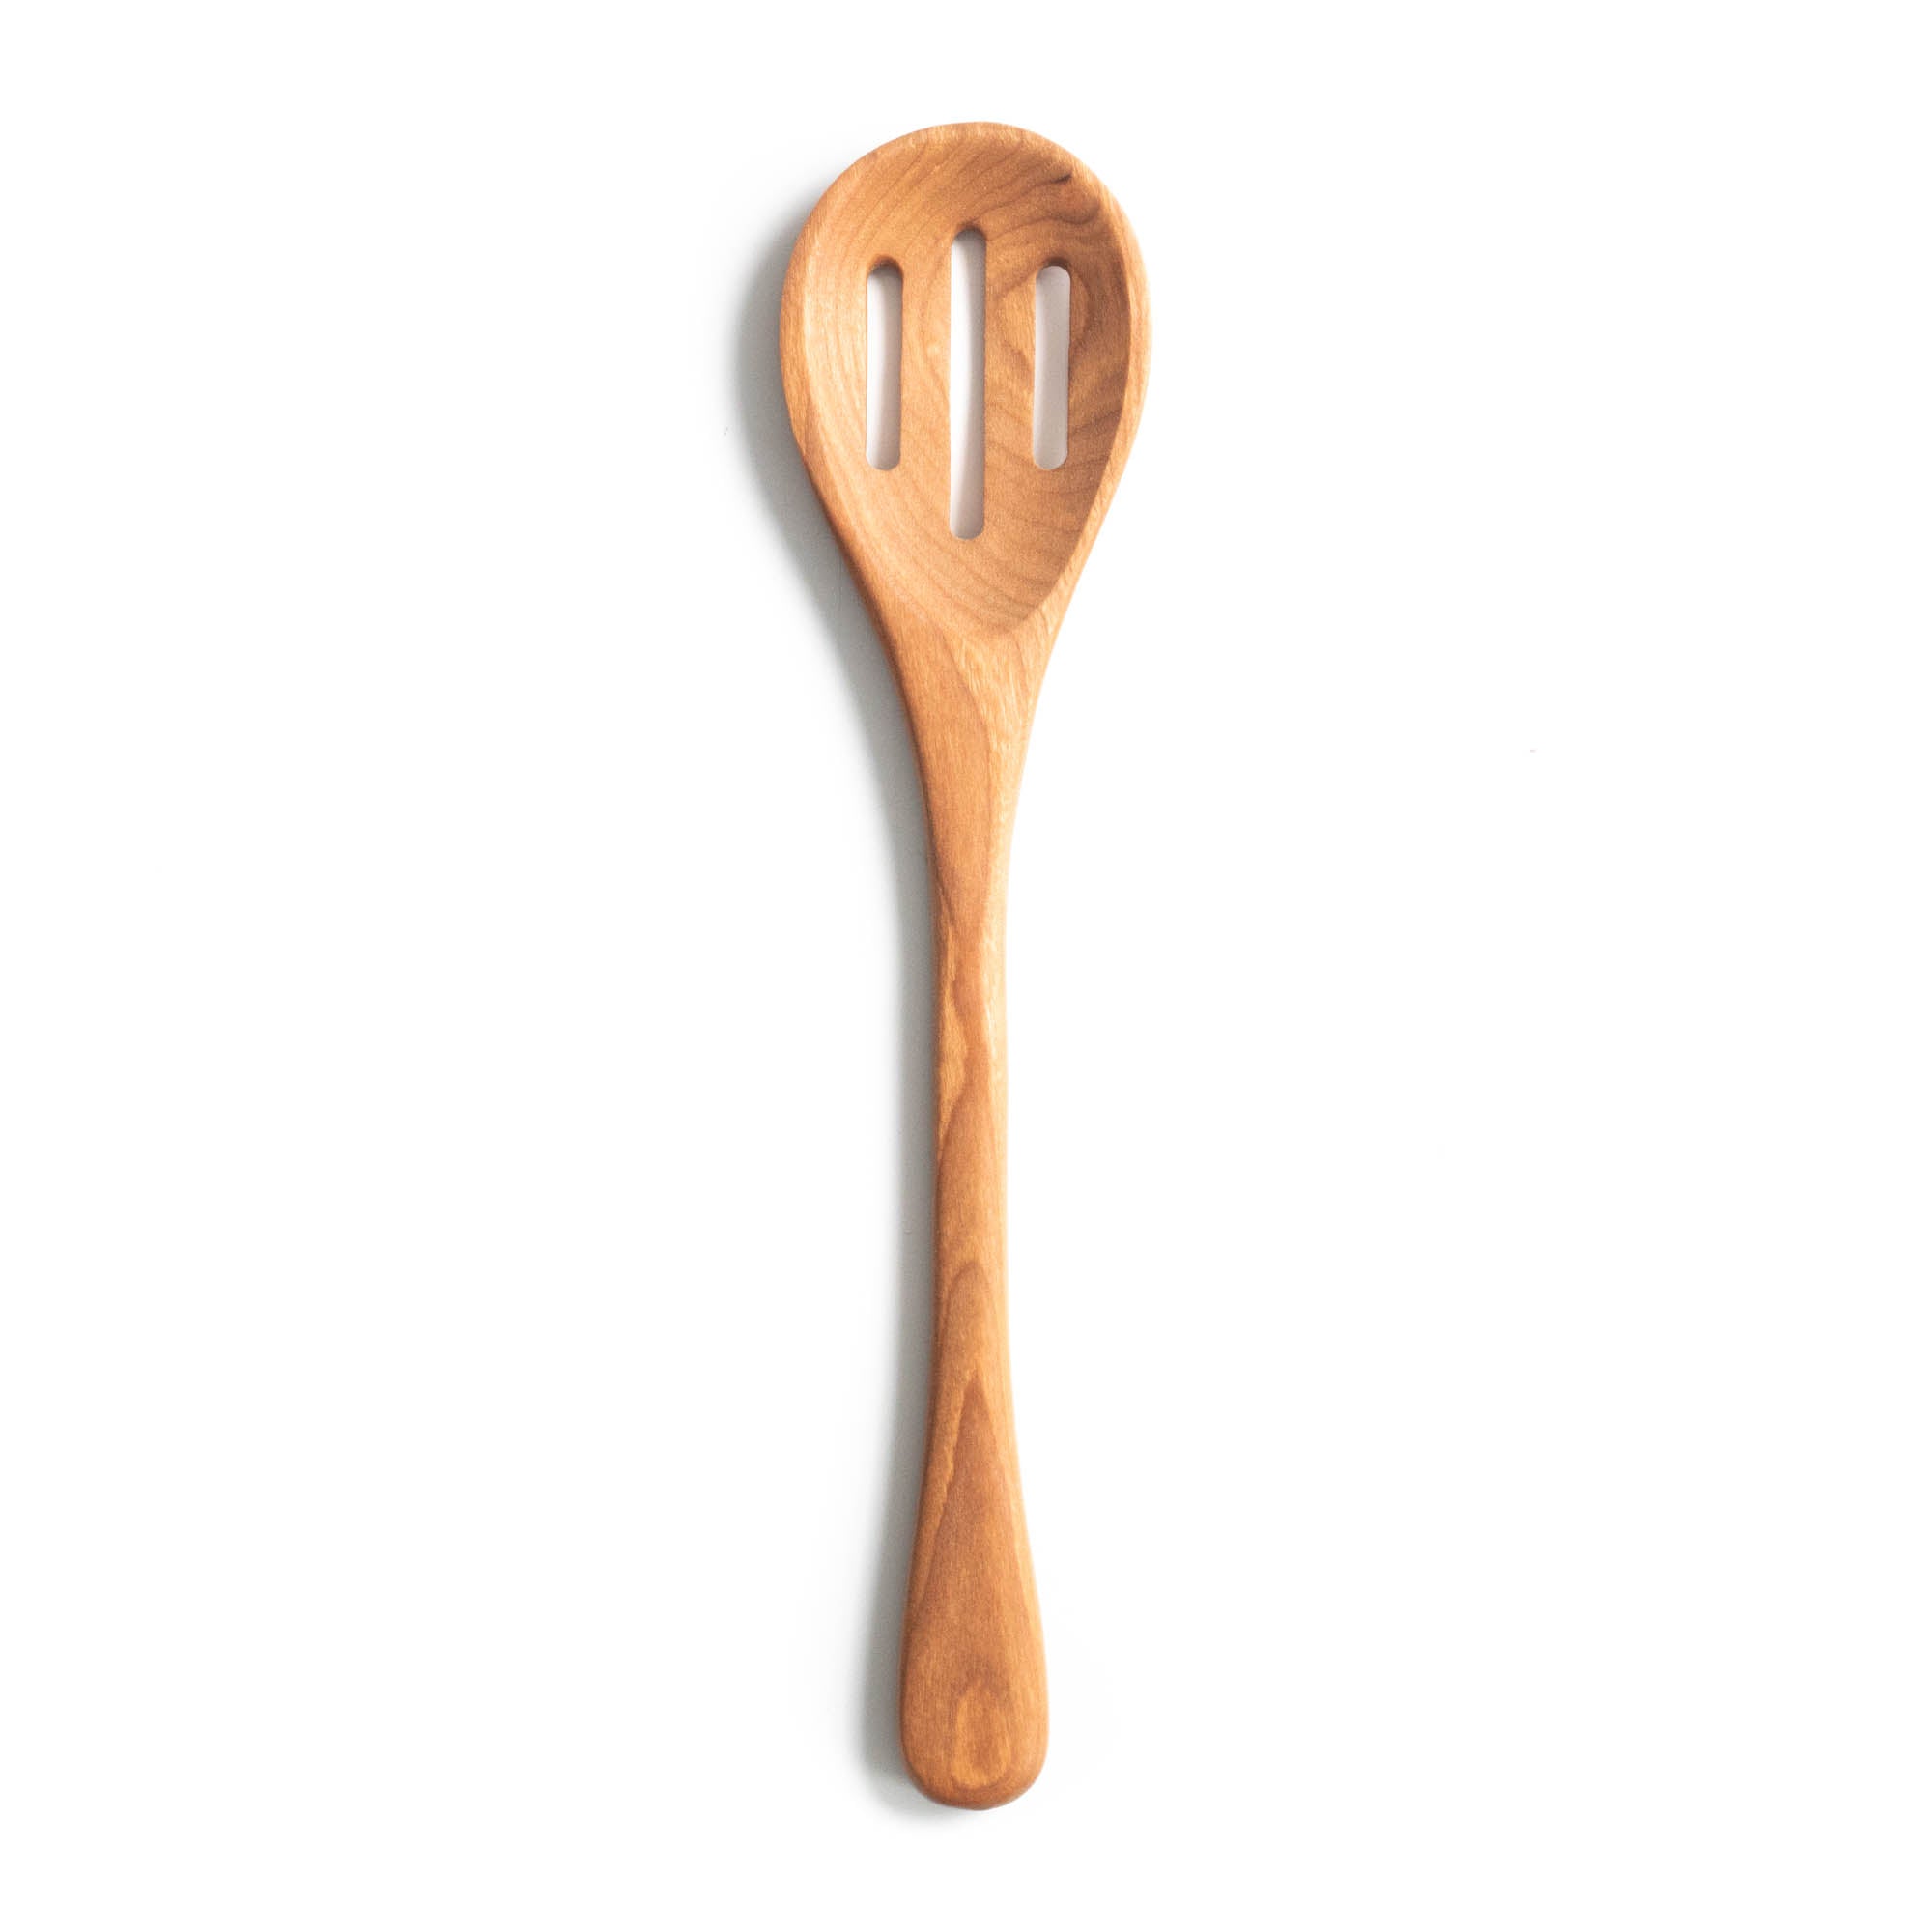 Slotted Ladle with Wooden Handle